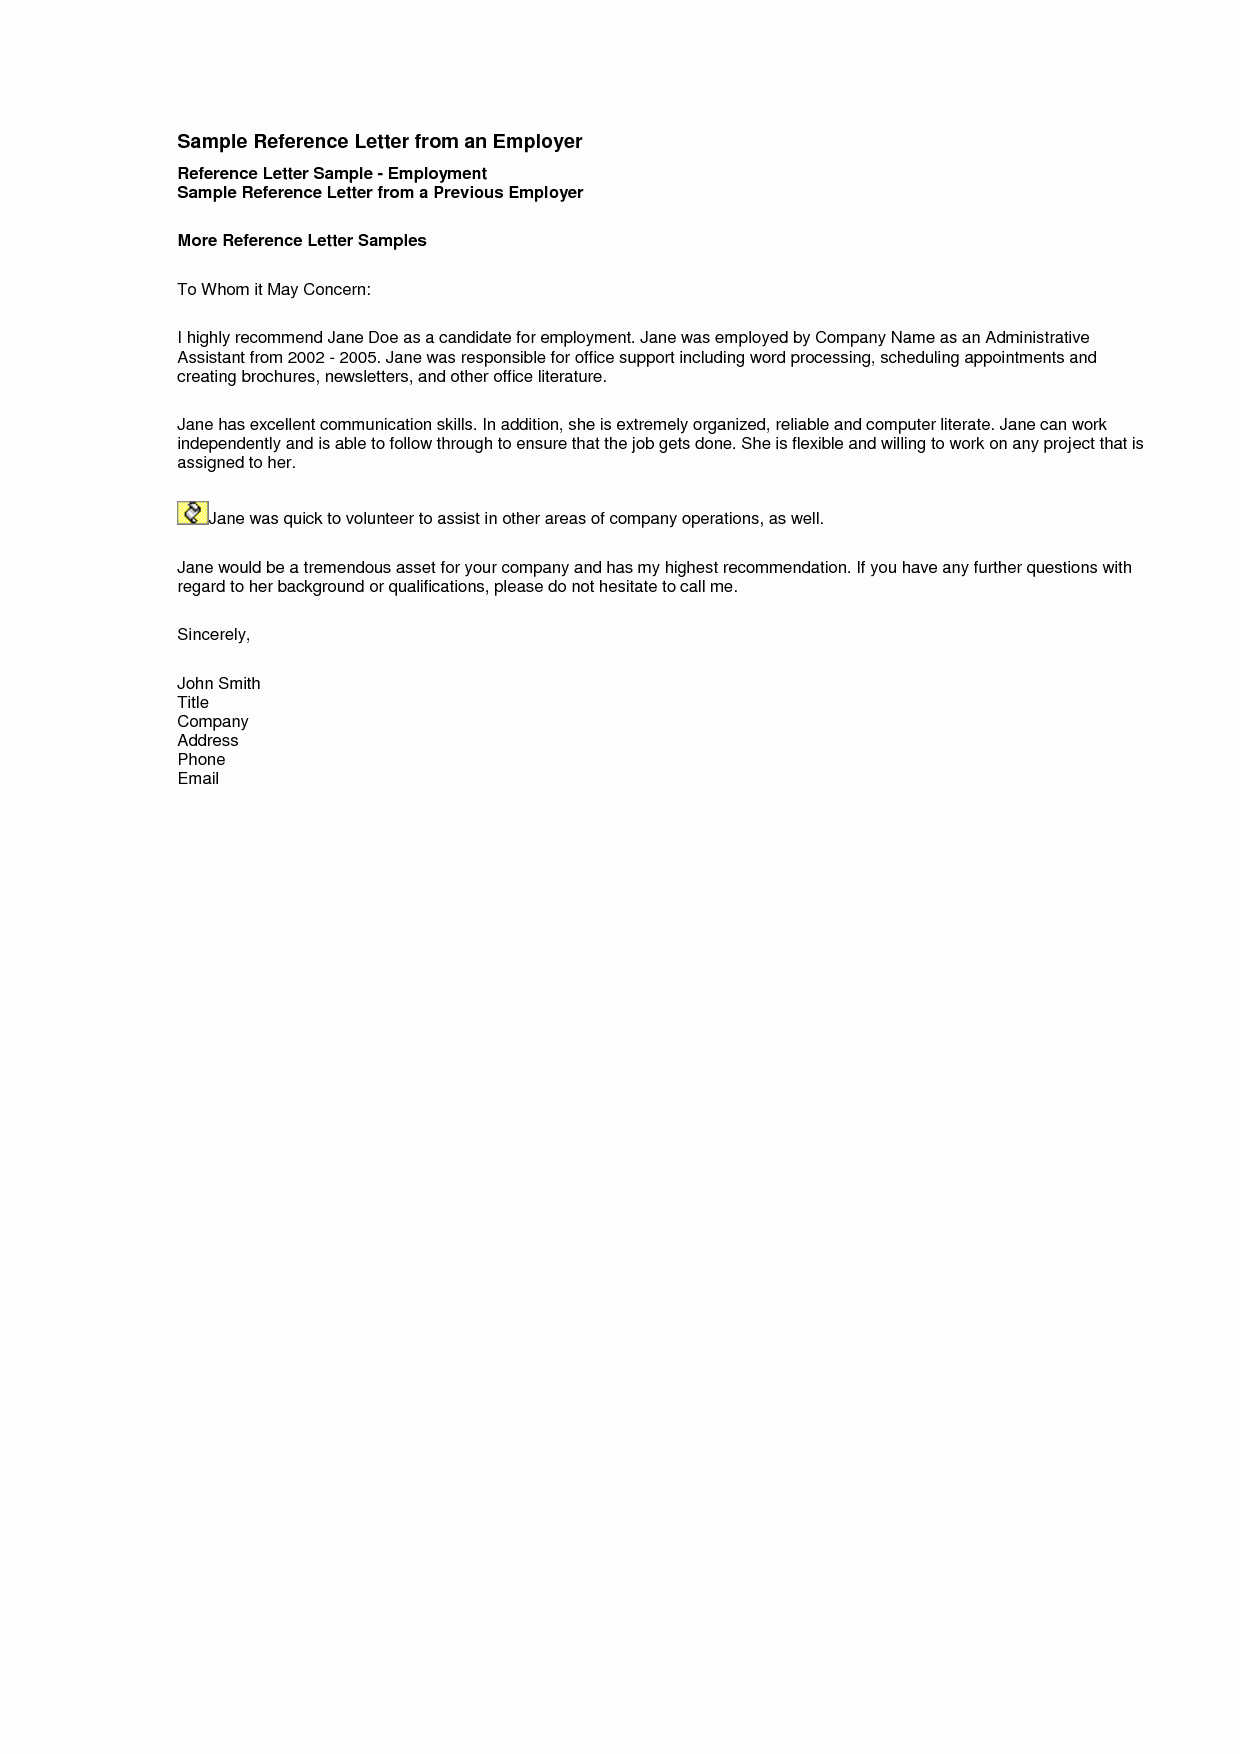 Letter Of Recommendation Employment Template Luxury Sample Reference Letter for Employment